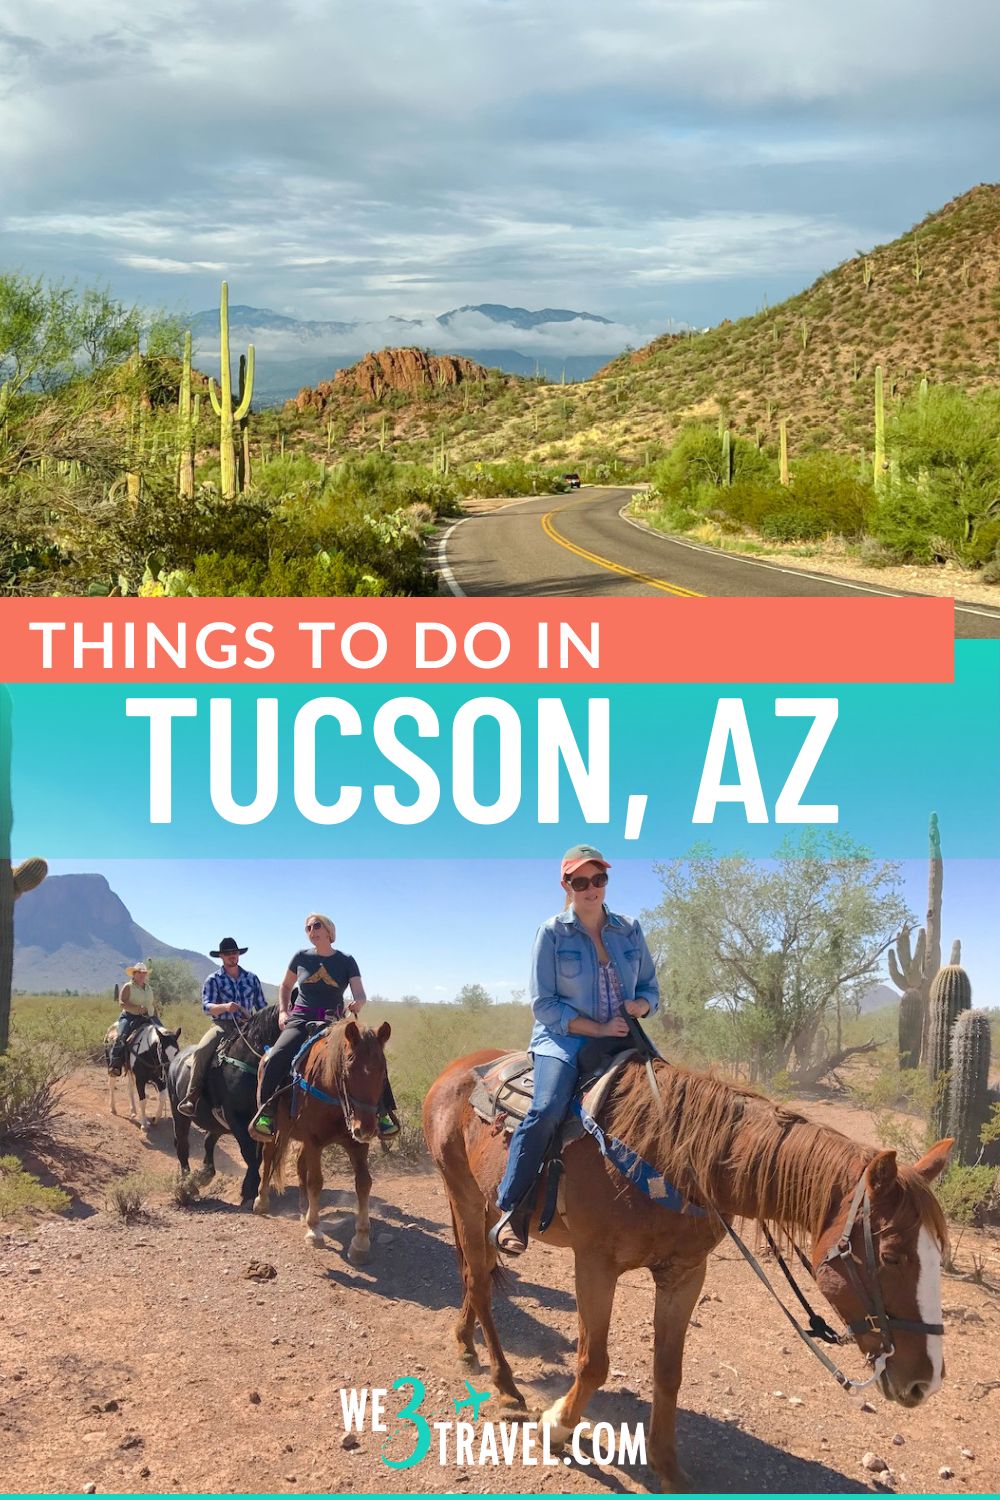 Things to do in Tucson AZ